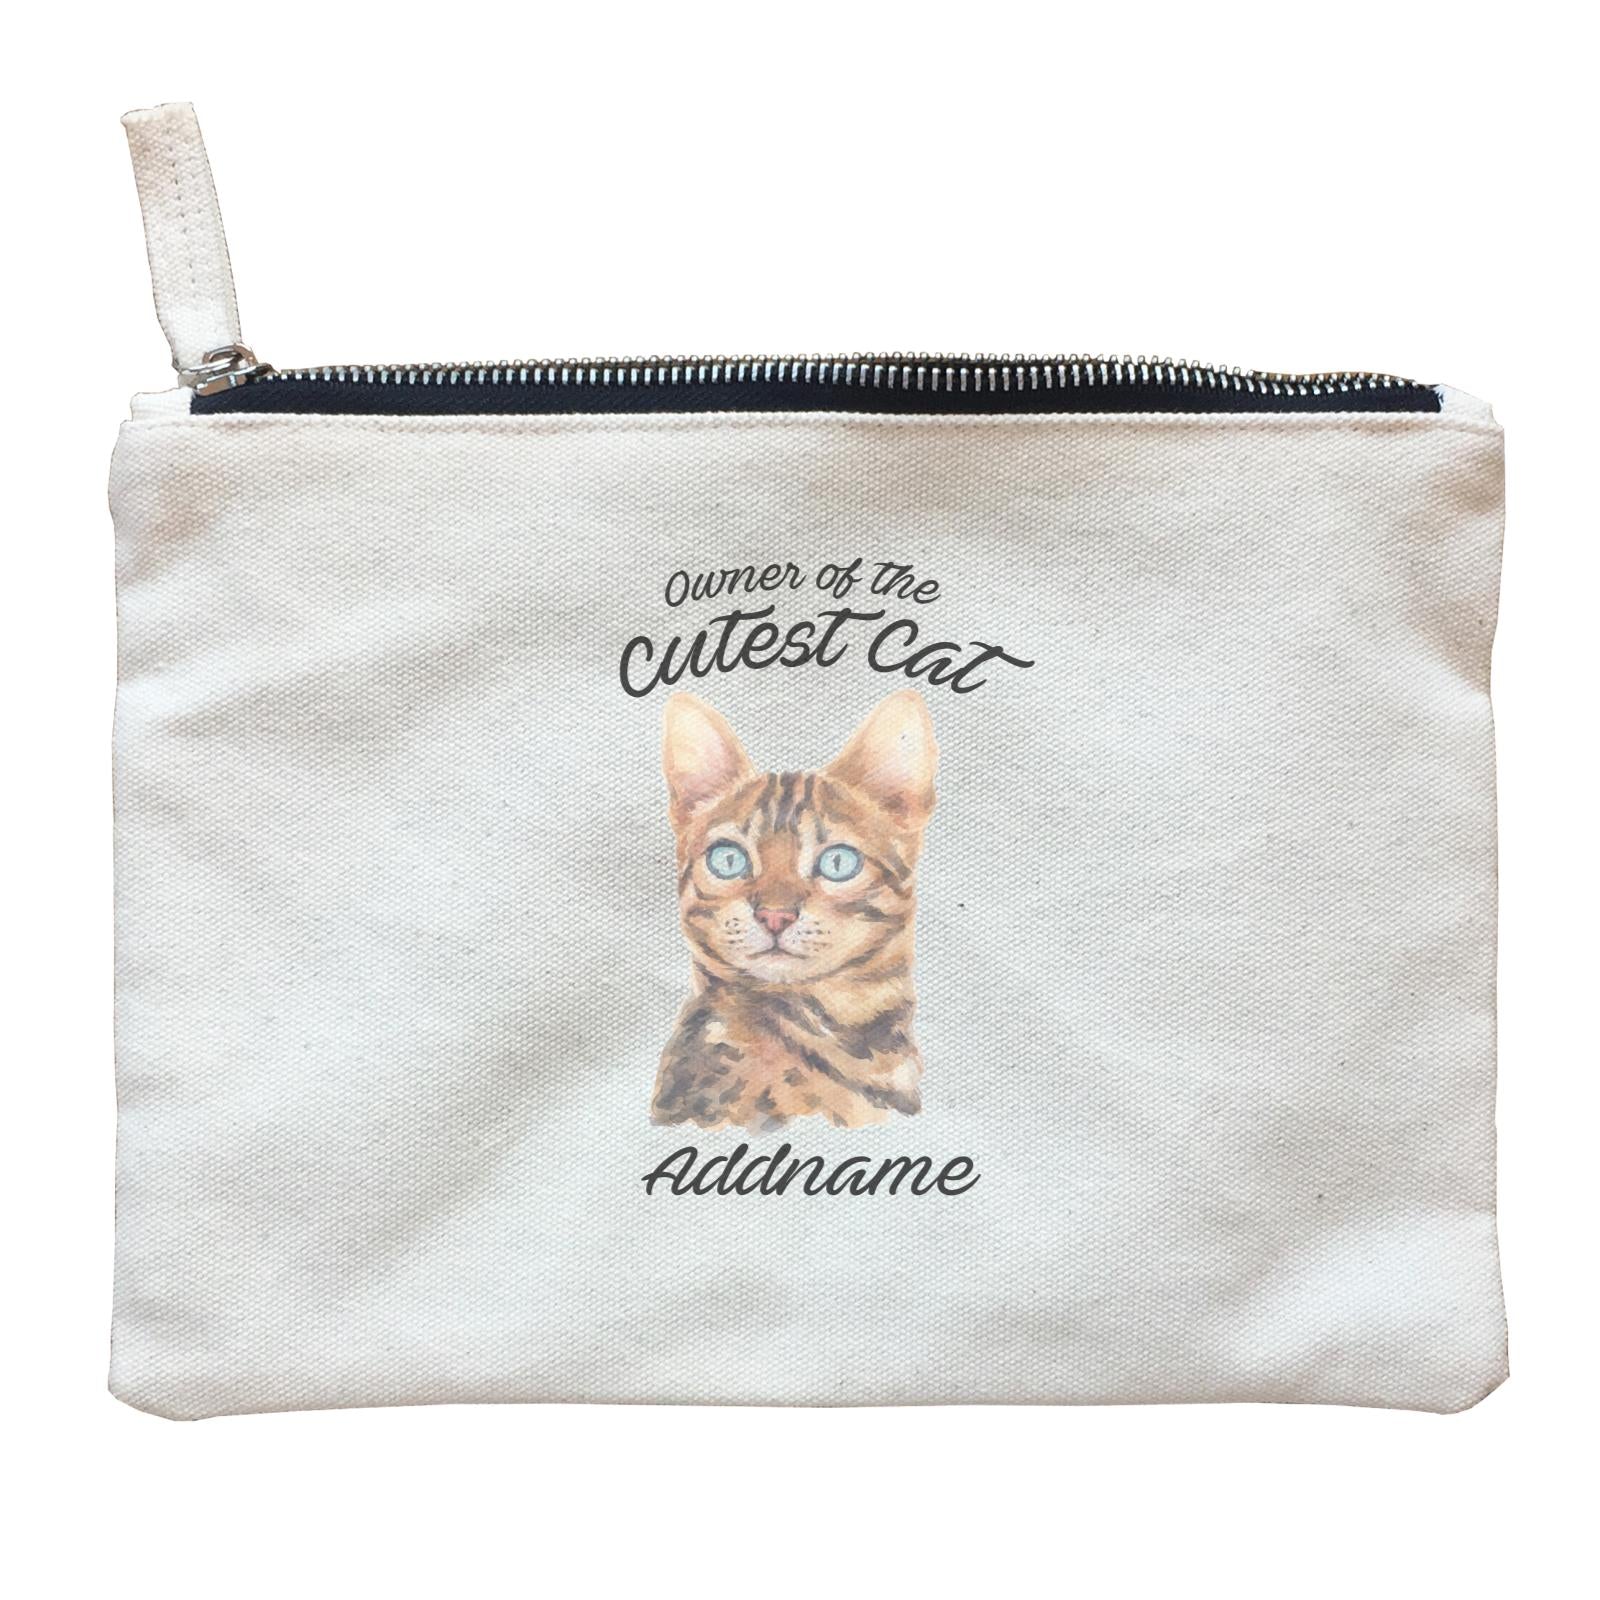 Watercolor Owner Of The Cutest Cat Bengal Addname Zipper Pouch